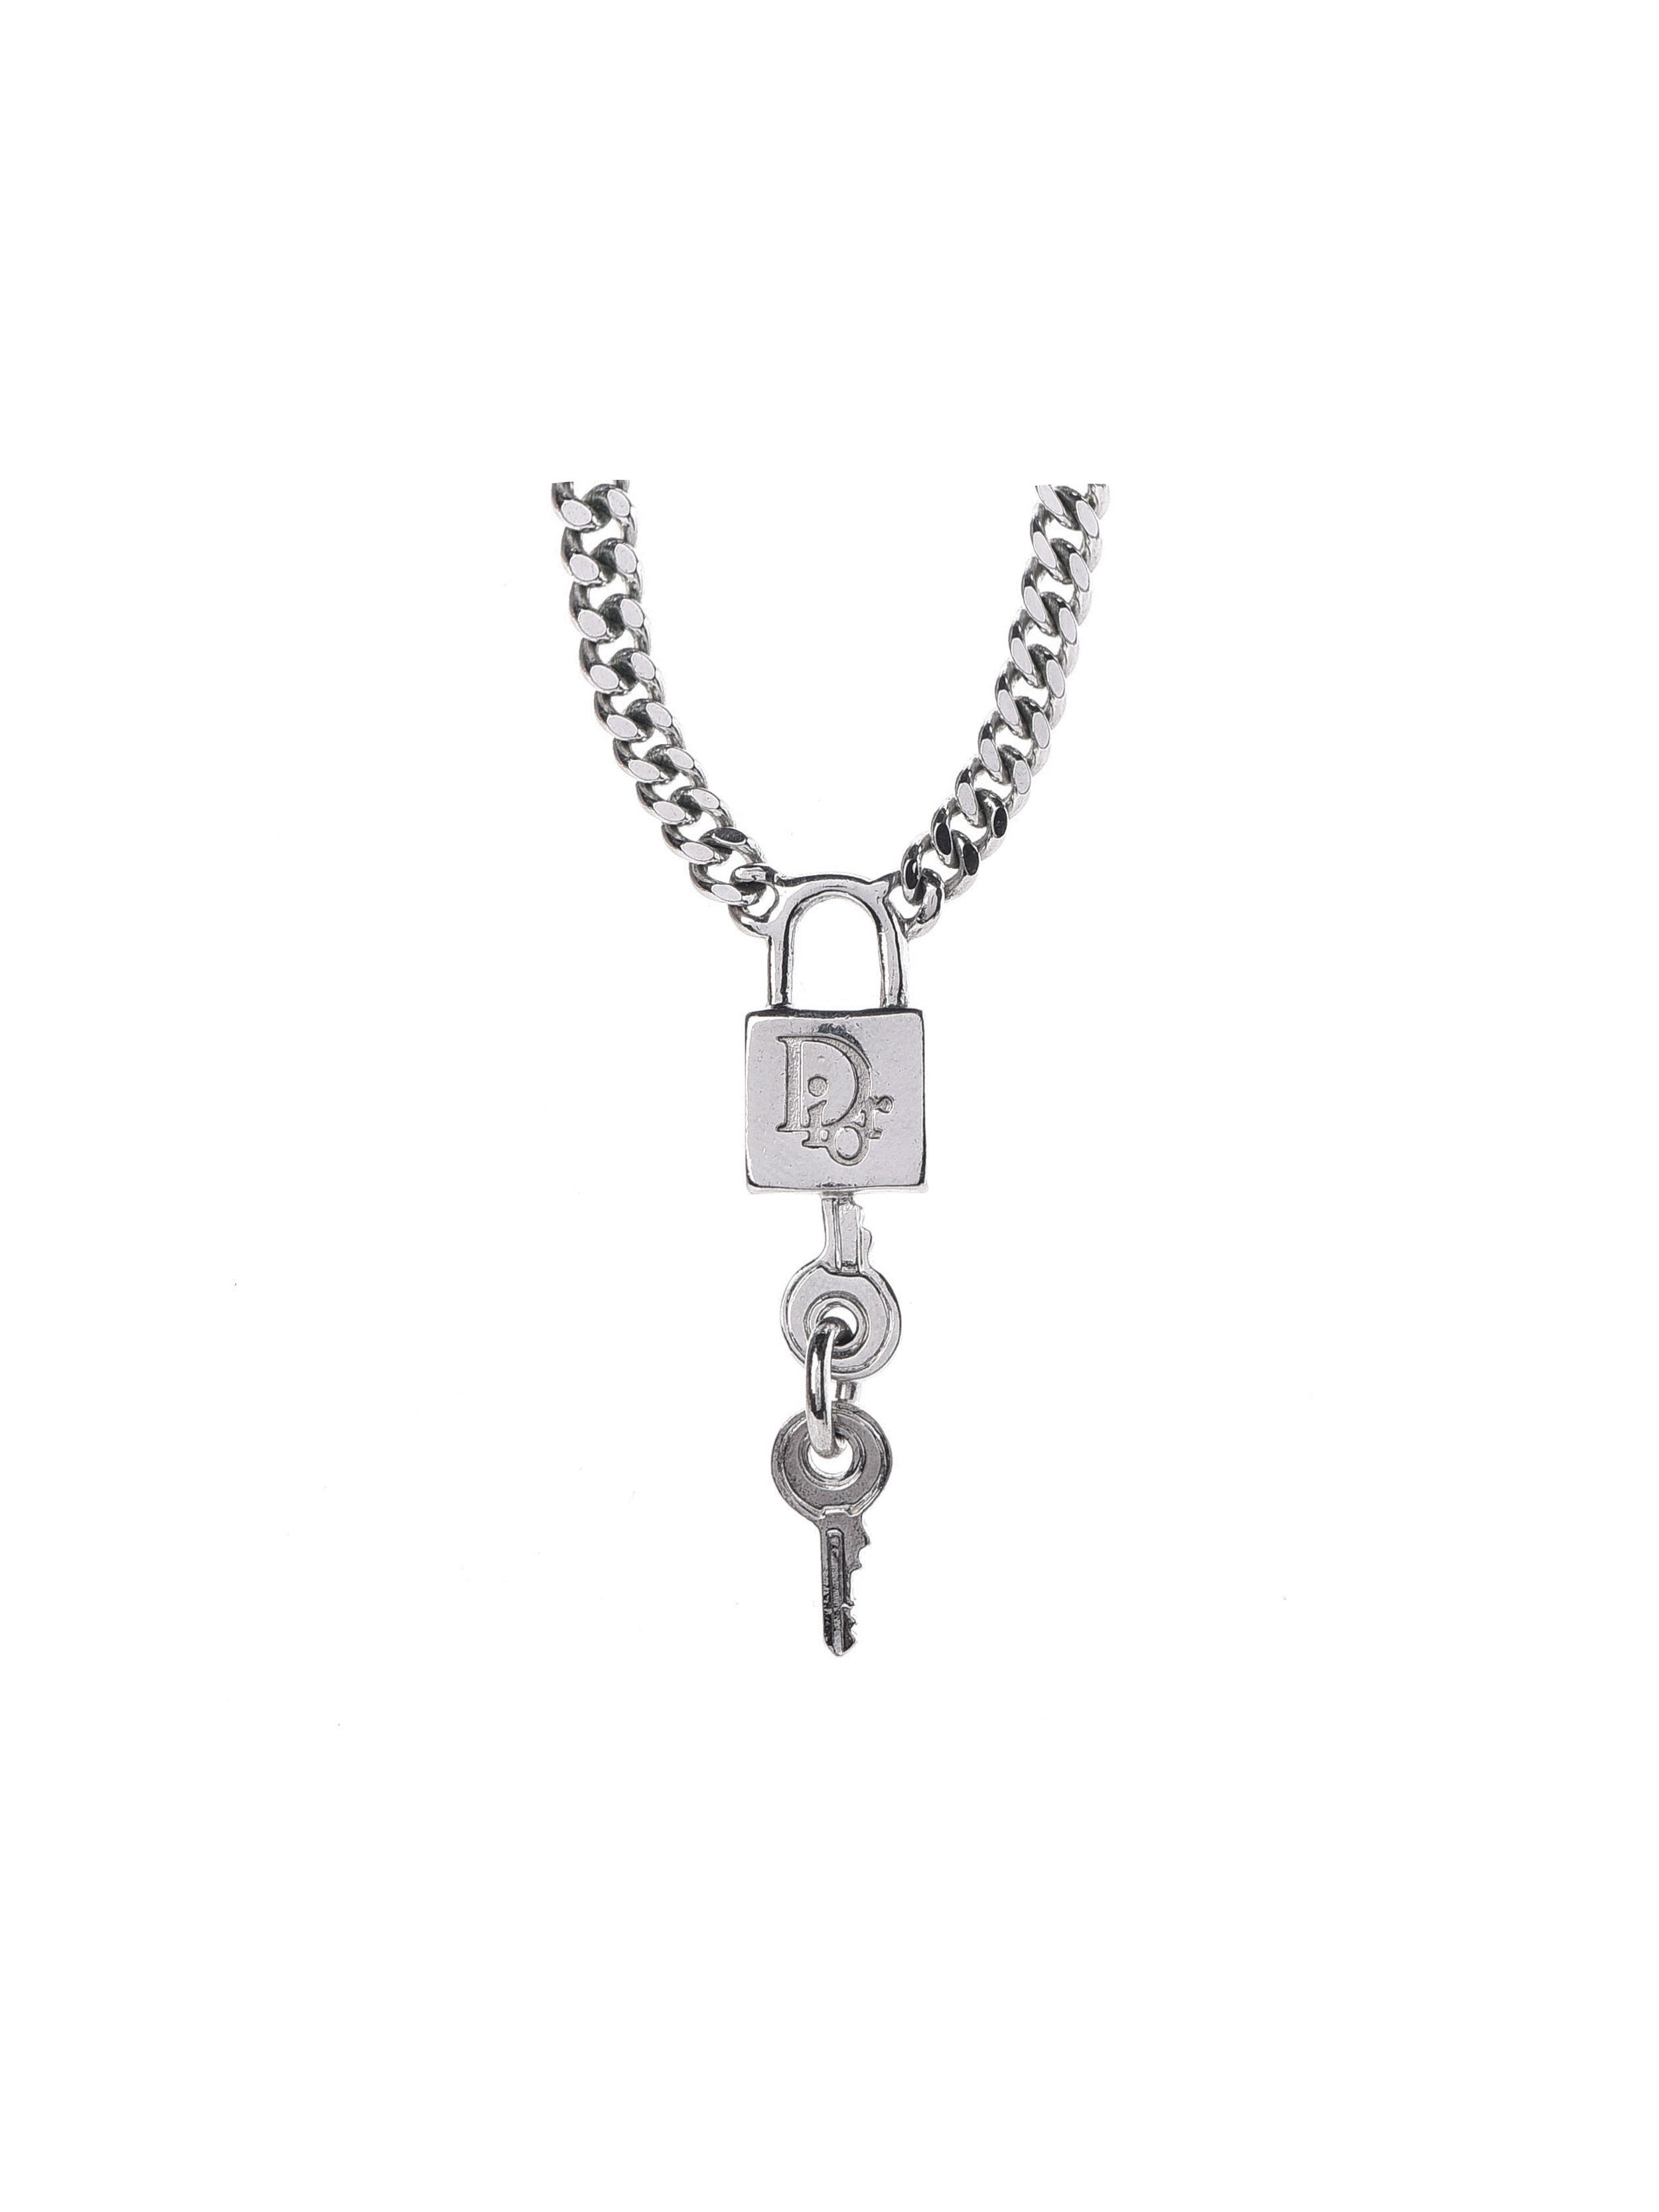 Christian Dior 2000s Padlock and Key Necklace